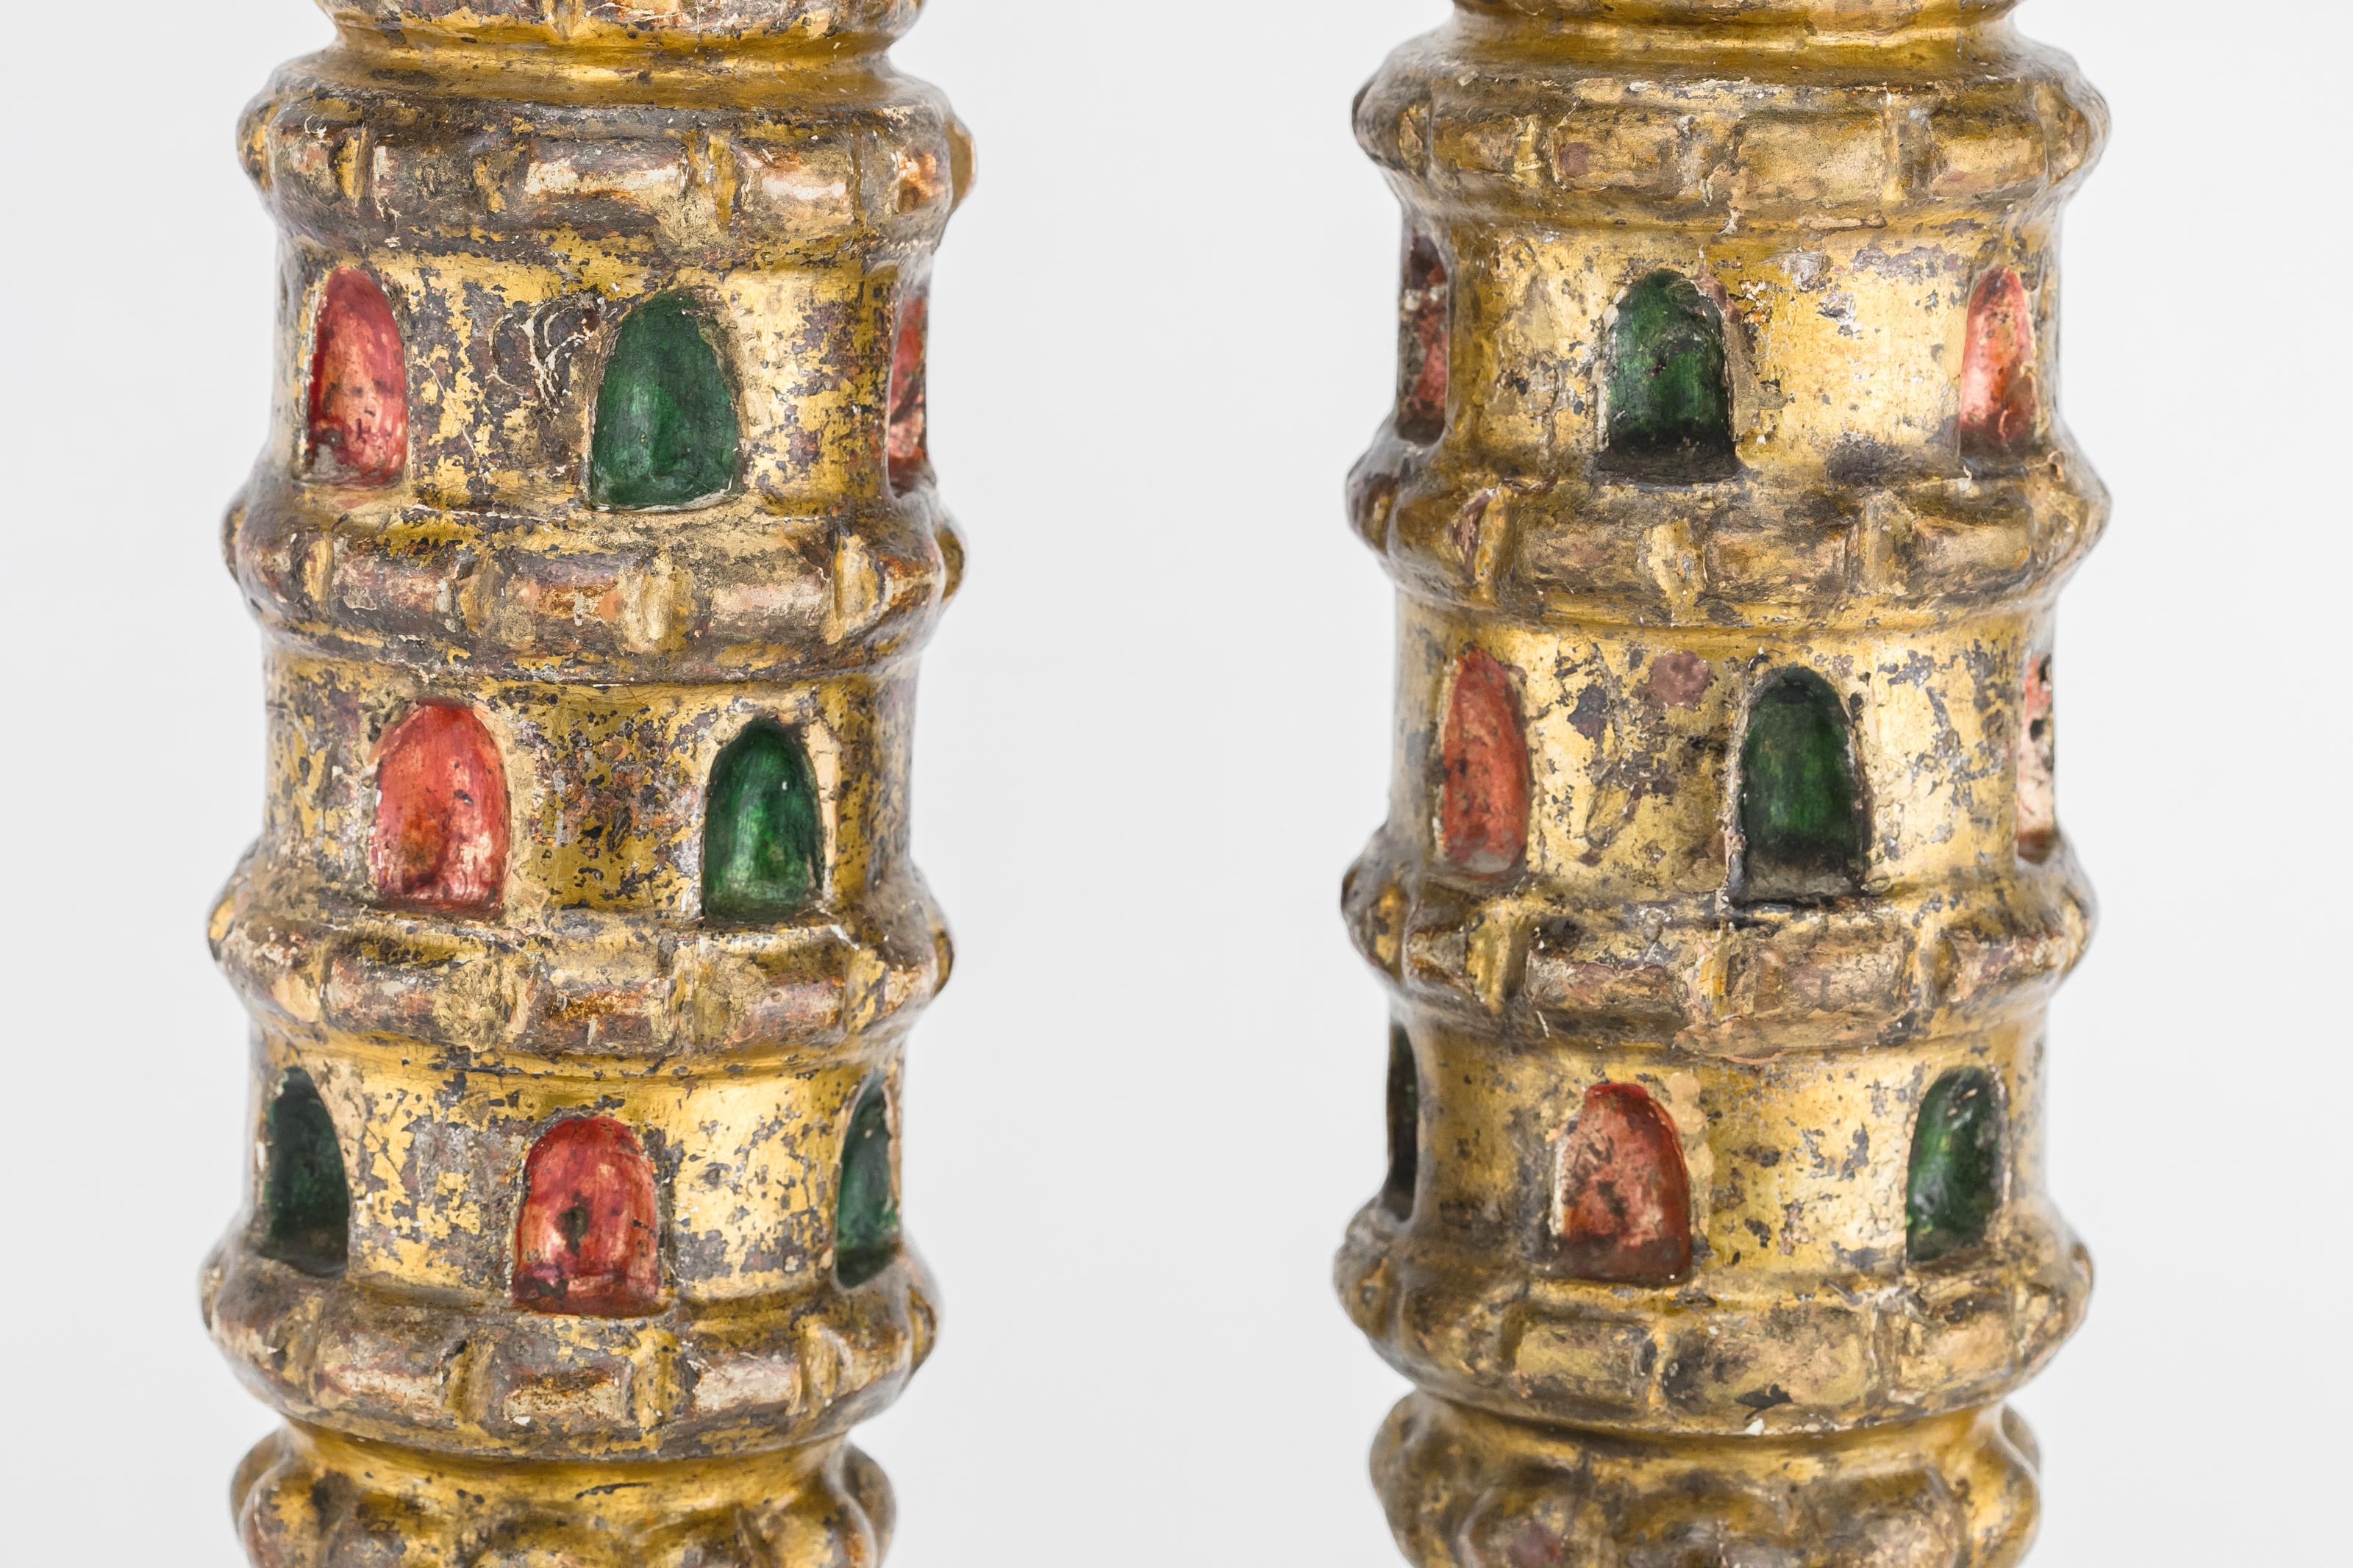 Pair of wooden Torah finials, Libya, 19th century.
Hand carved and decorated with red, green and gold paint.
Fine and rare example of wooden Torah ornaments.
For a similar example, see Hechal Shlomo Museum Catalogue, Jewish life in art and